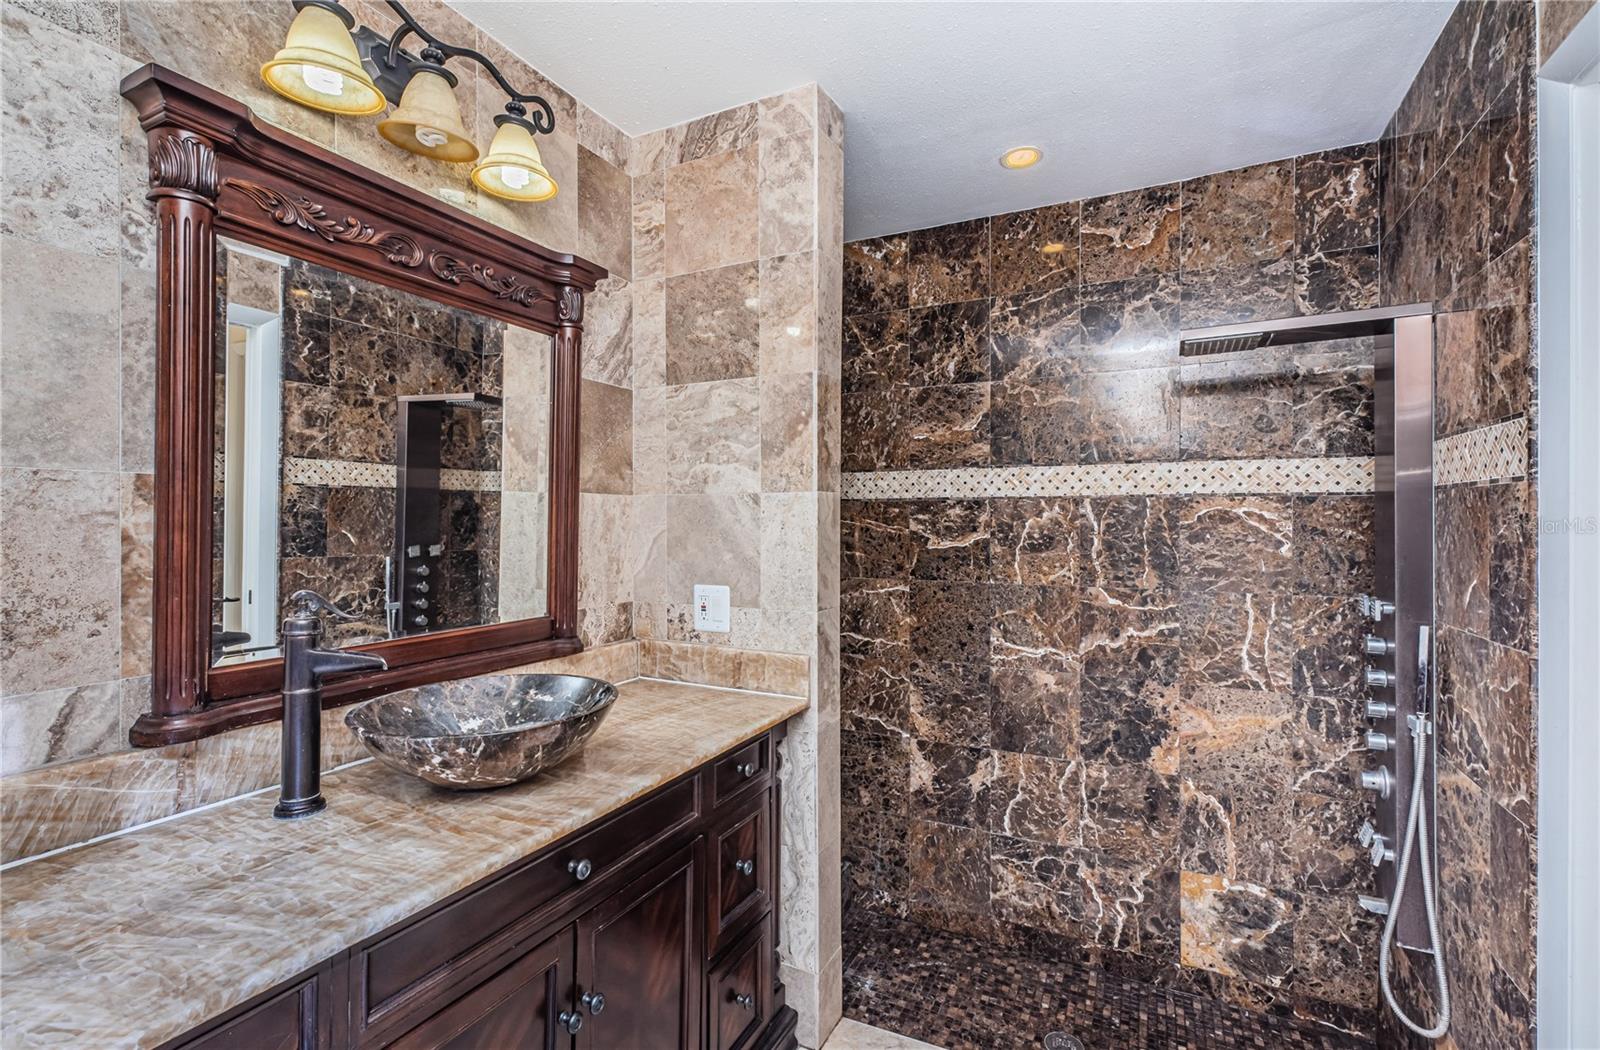 Master bath and shower with onyx counter and Peruvian marble tile.